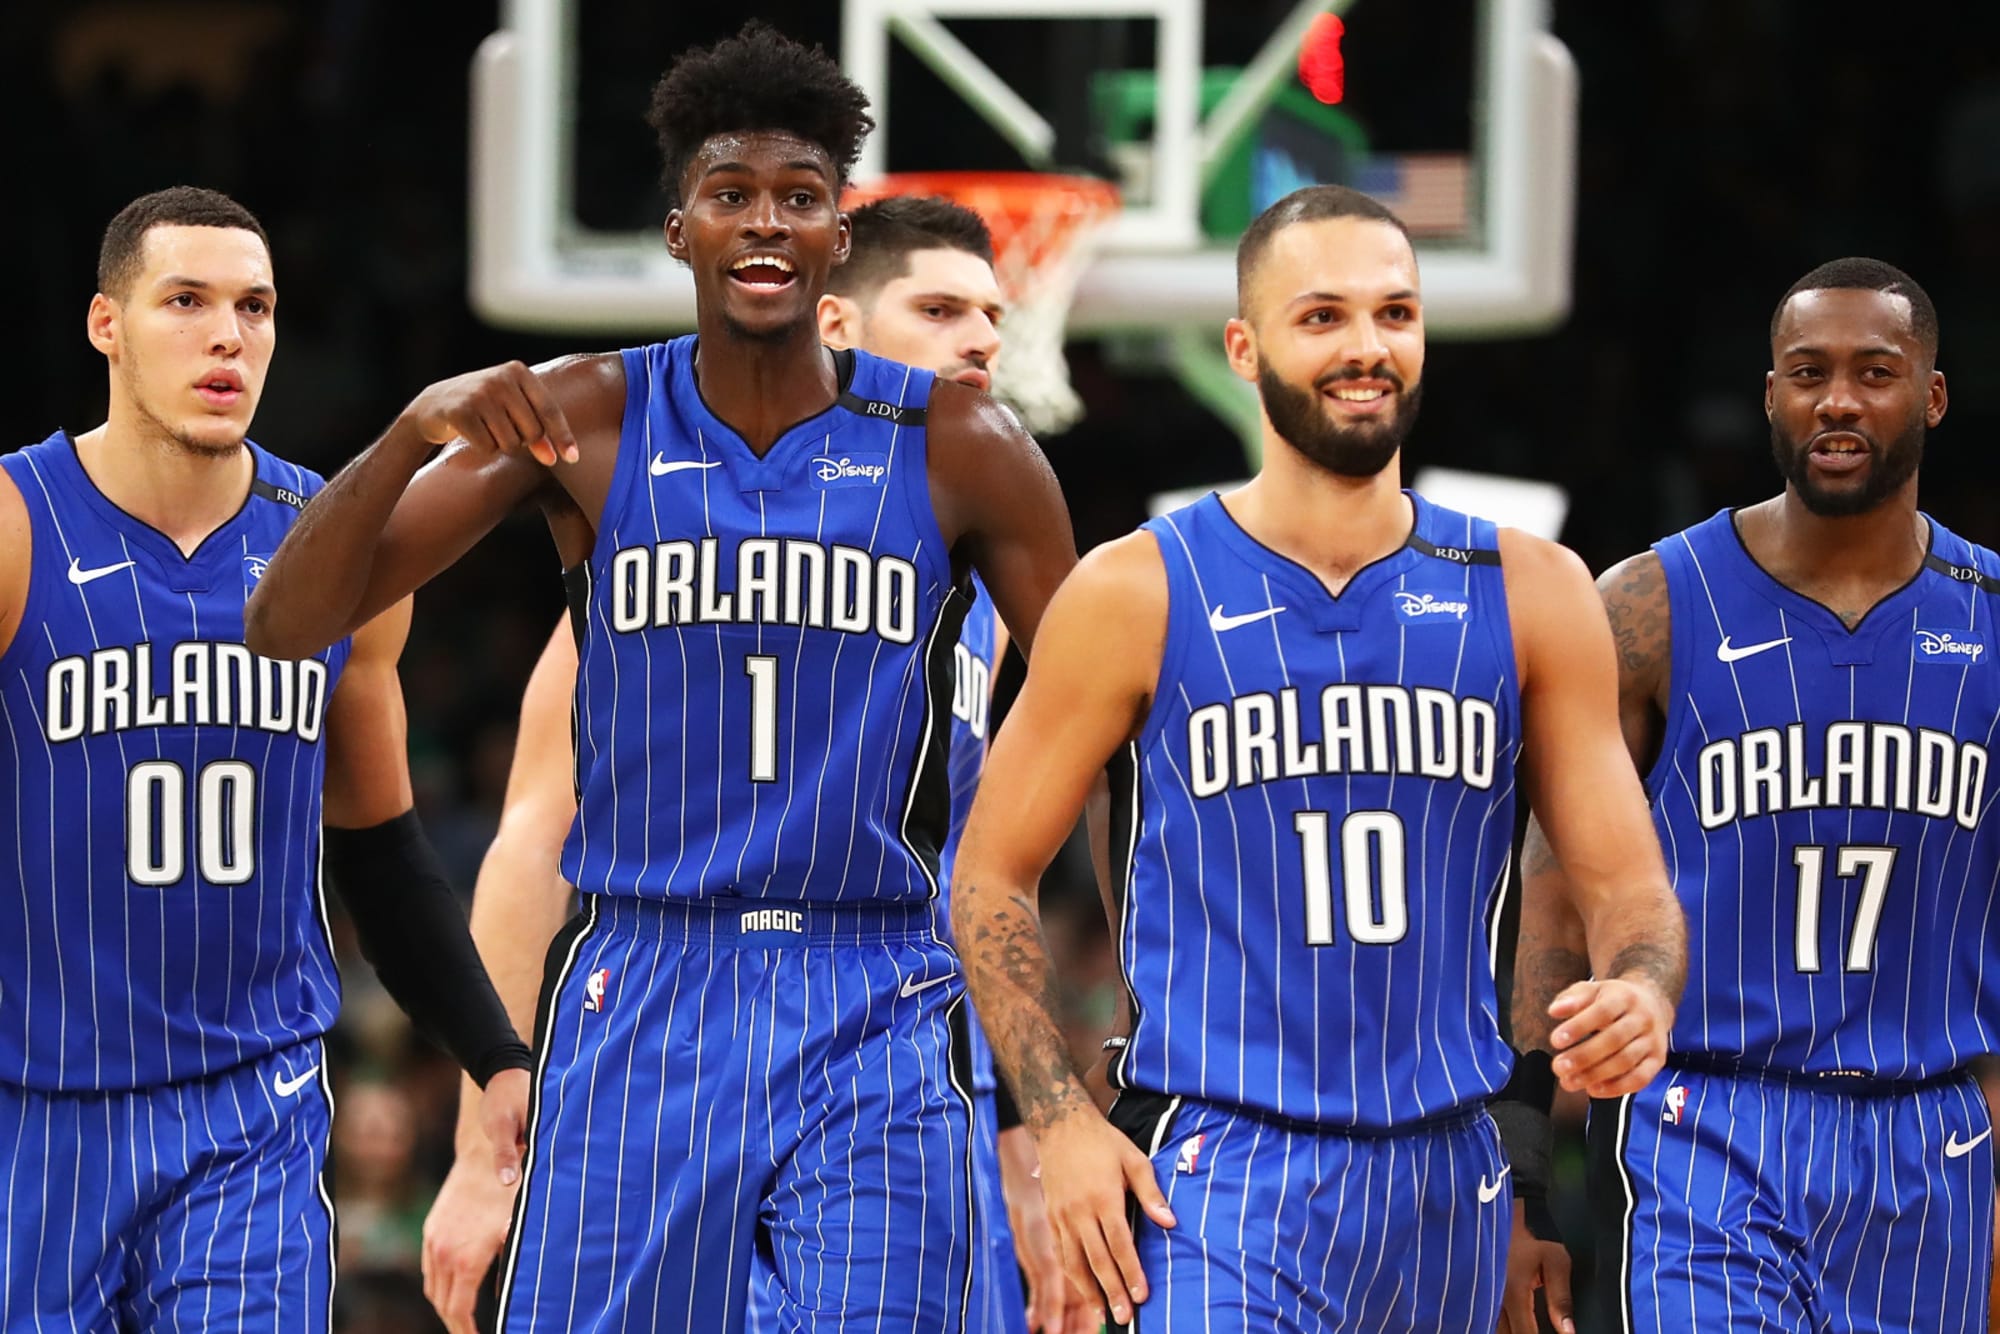 Orlando Magic must find second star to make Playoff push